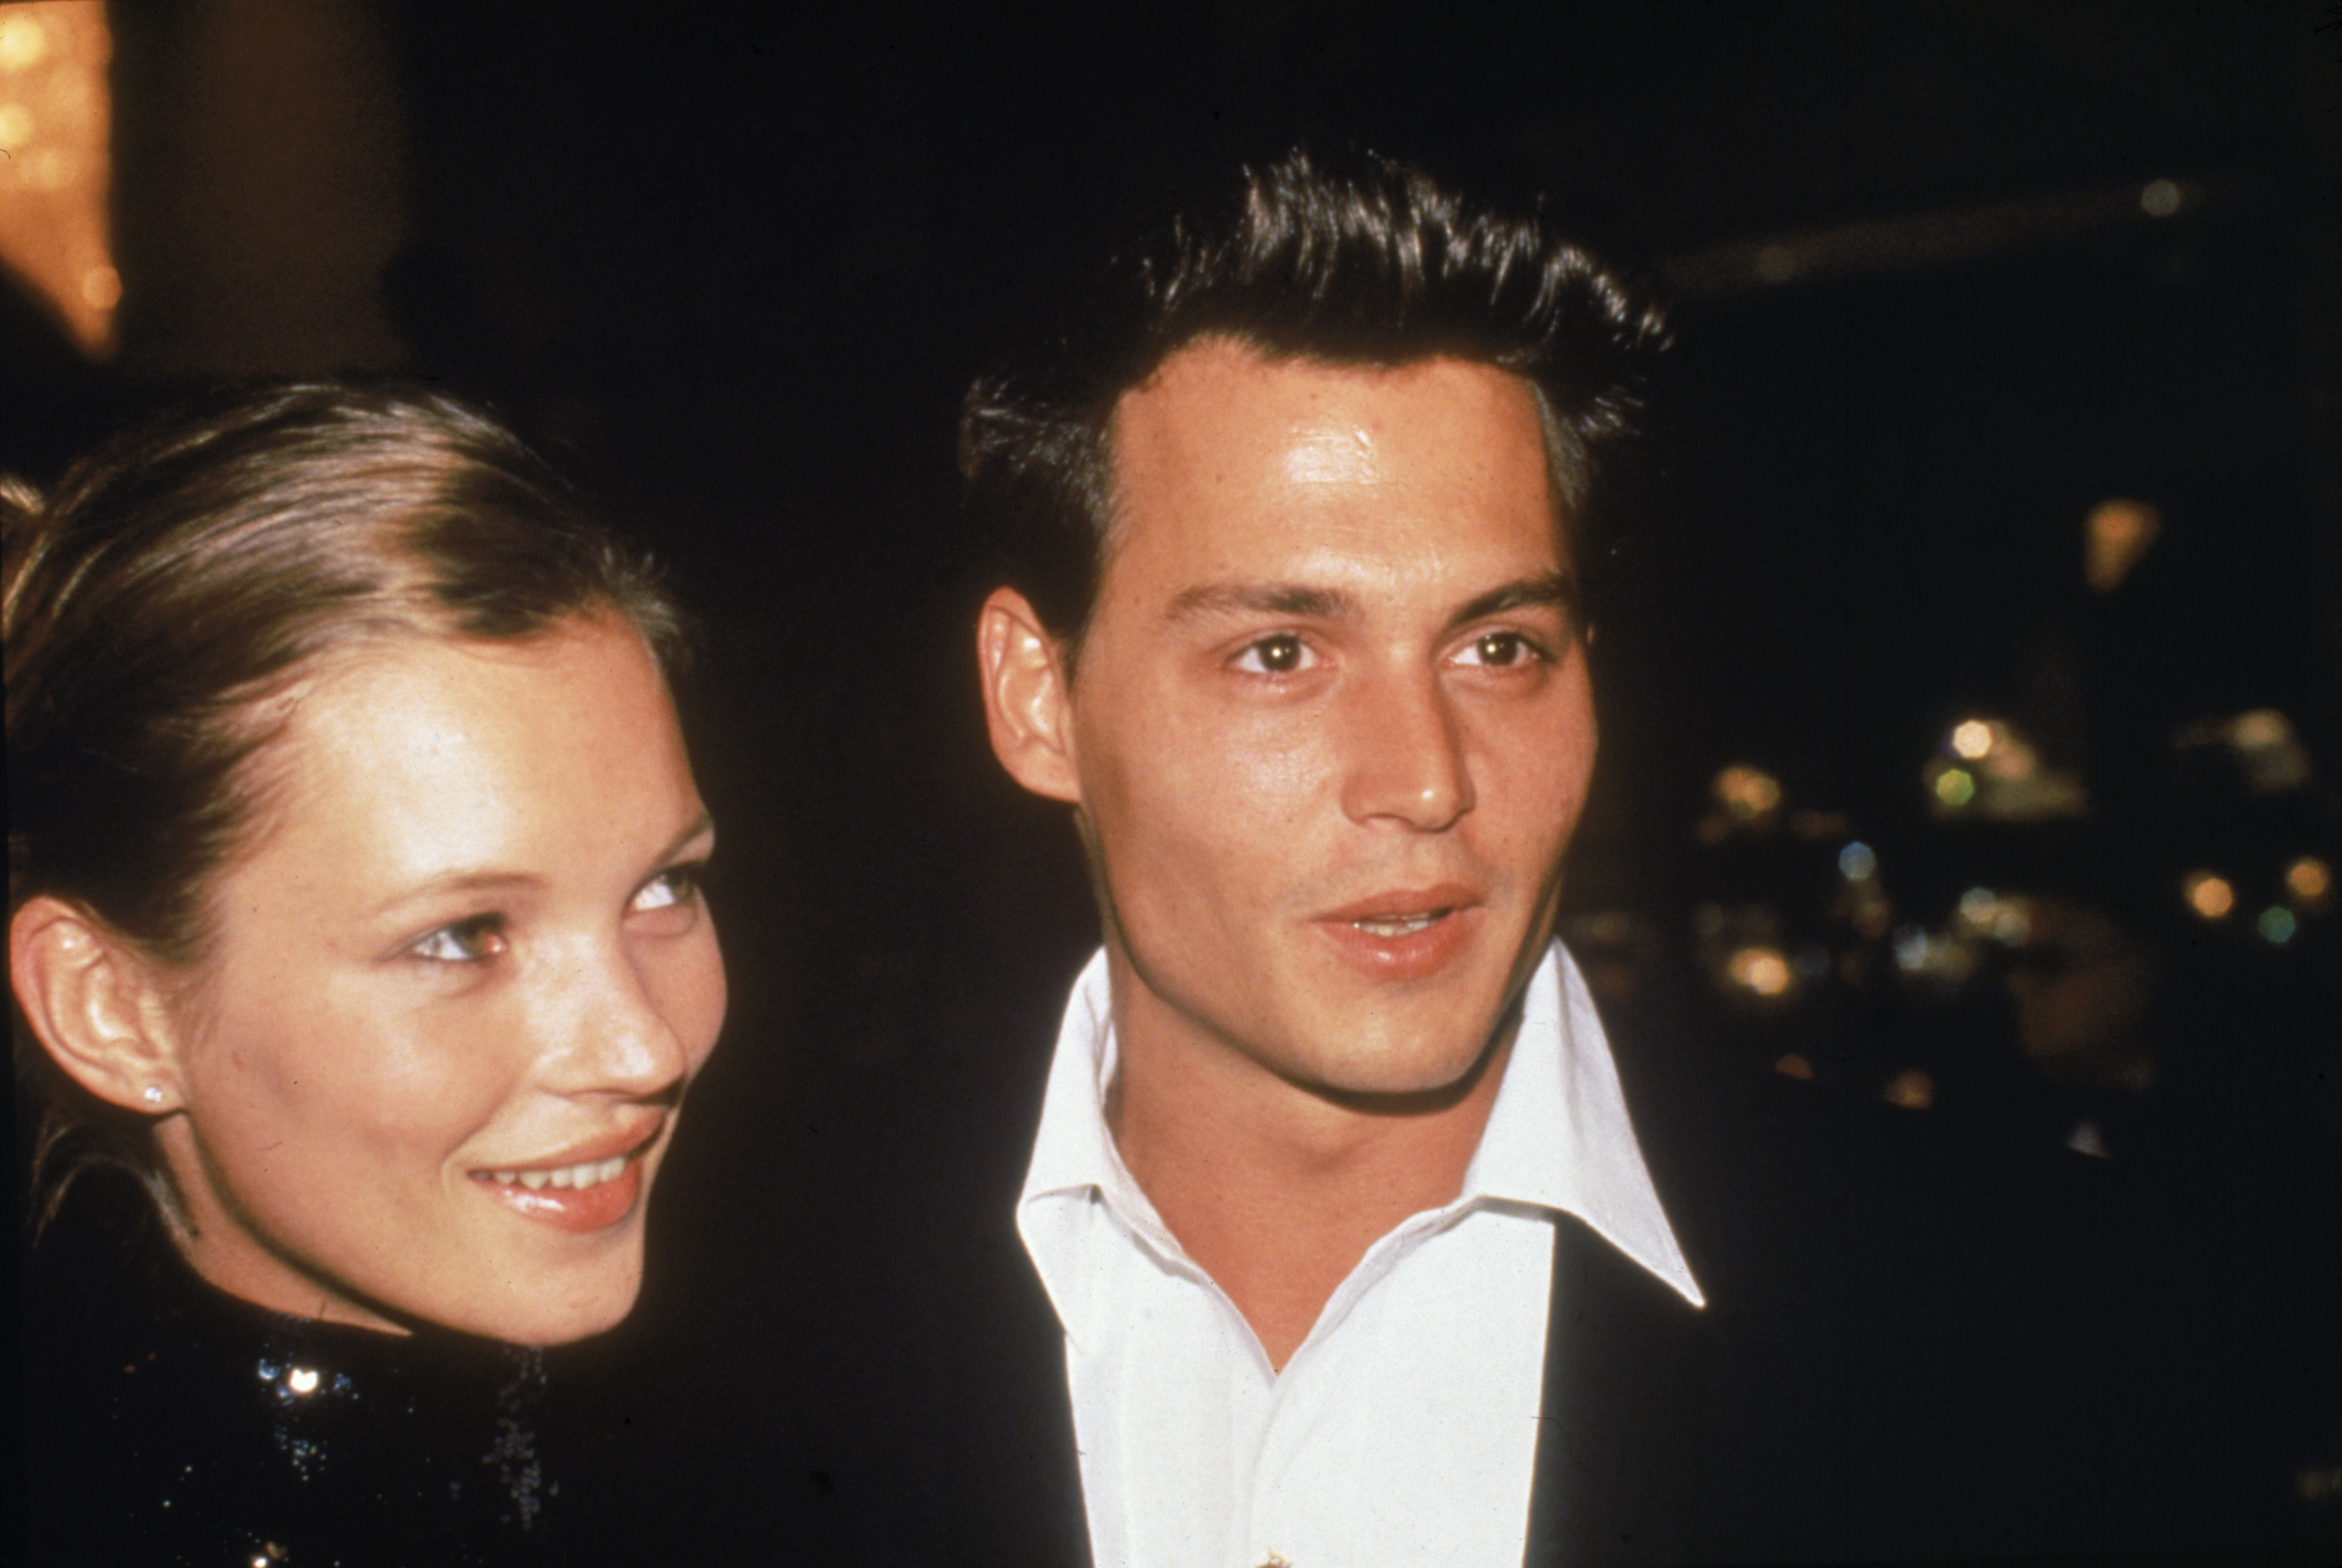 Kate Moss and Johnny Depp at the 52nd Annual Golden Globe Awards in Beverly Hills, California on January 21, 1995 | Source: Getty Images